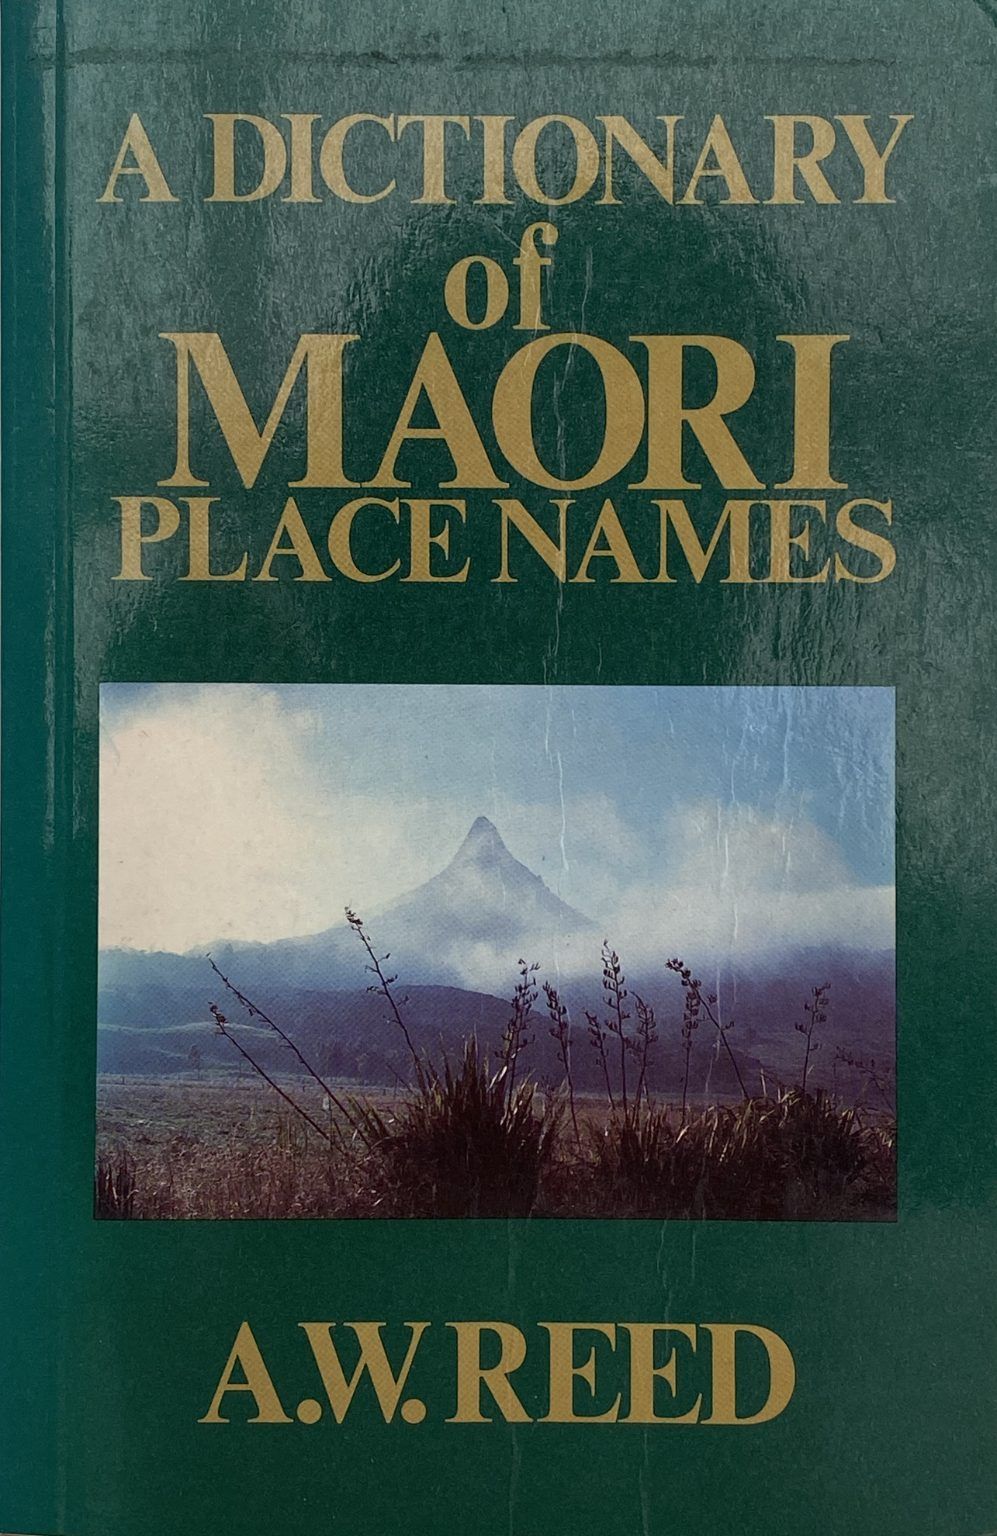 A DICTIONARY OF MAORI PLACE NAMES